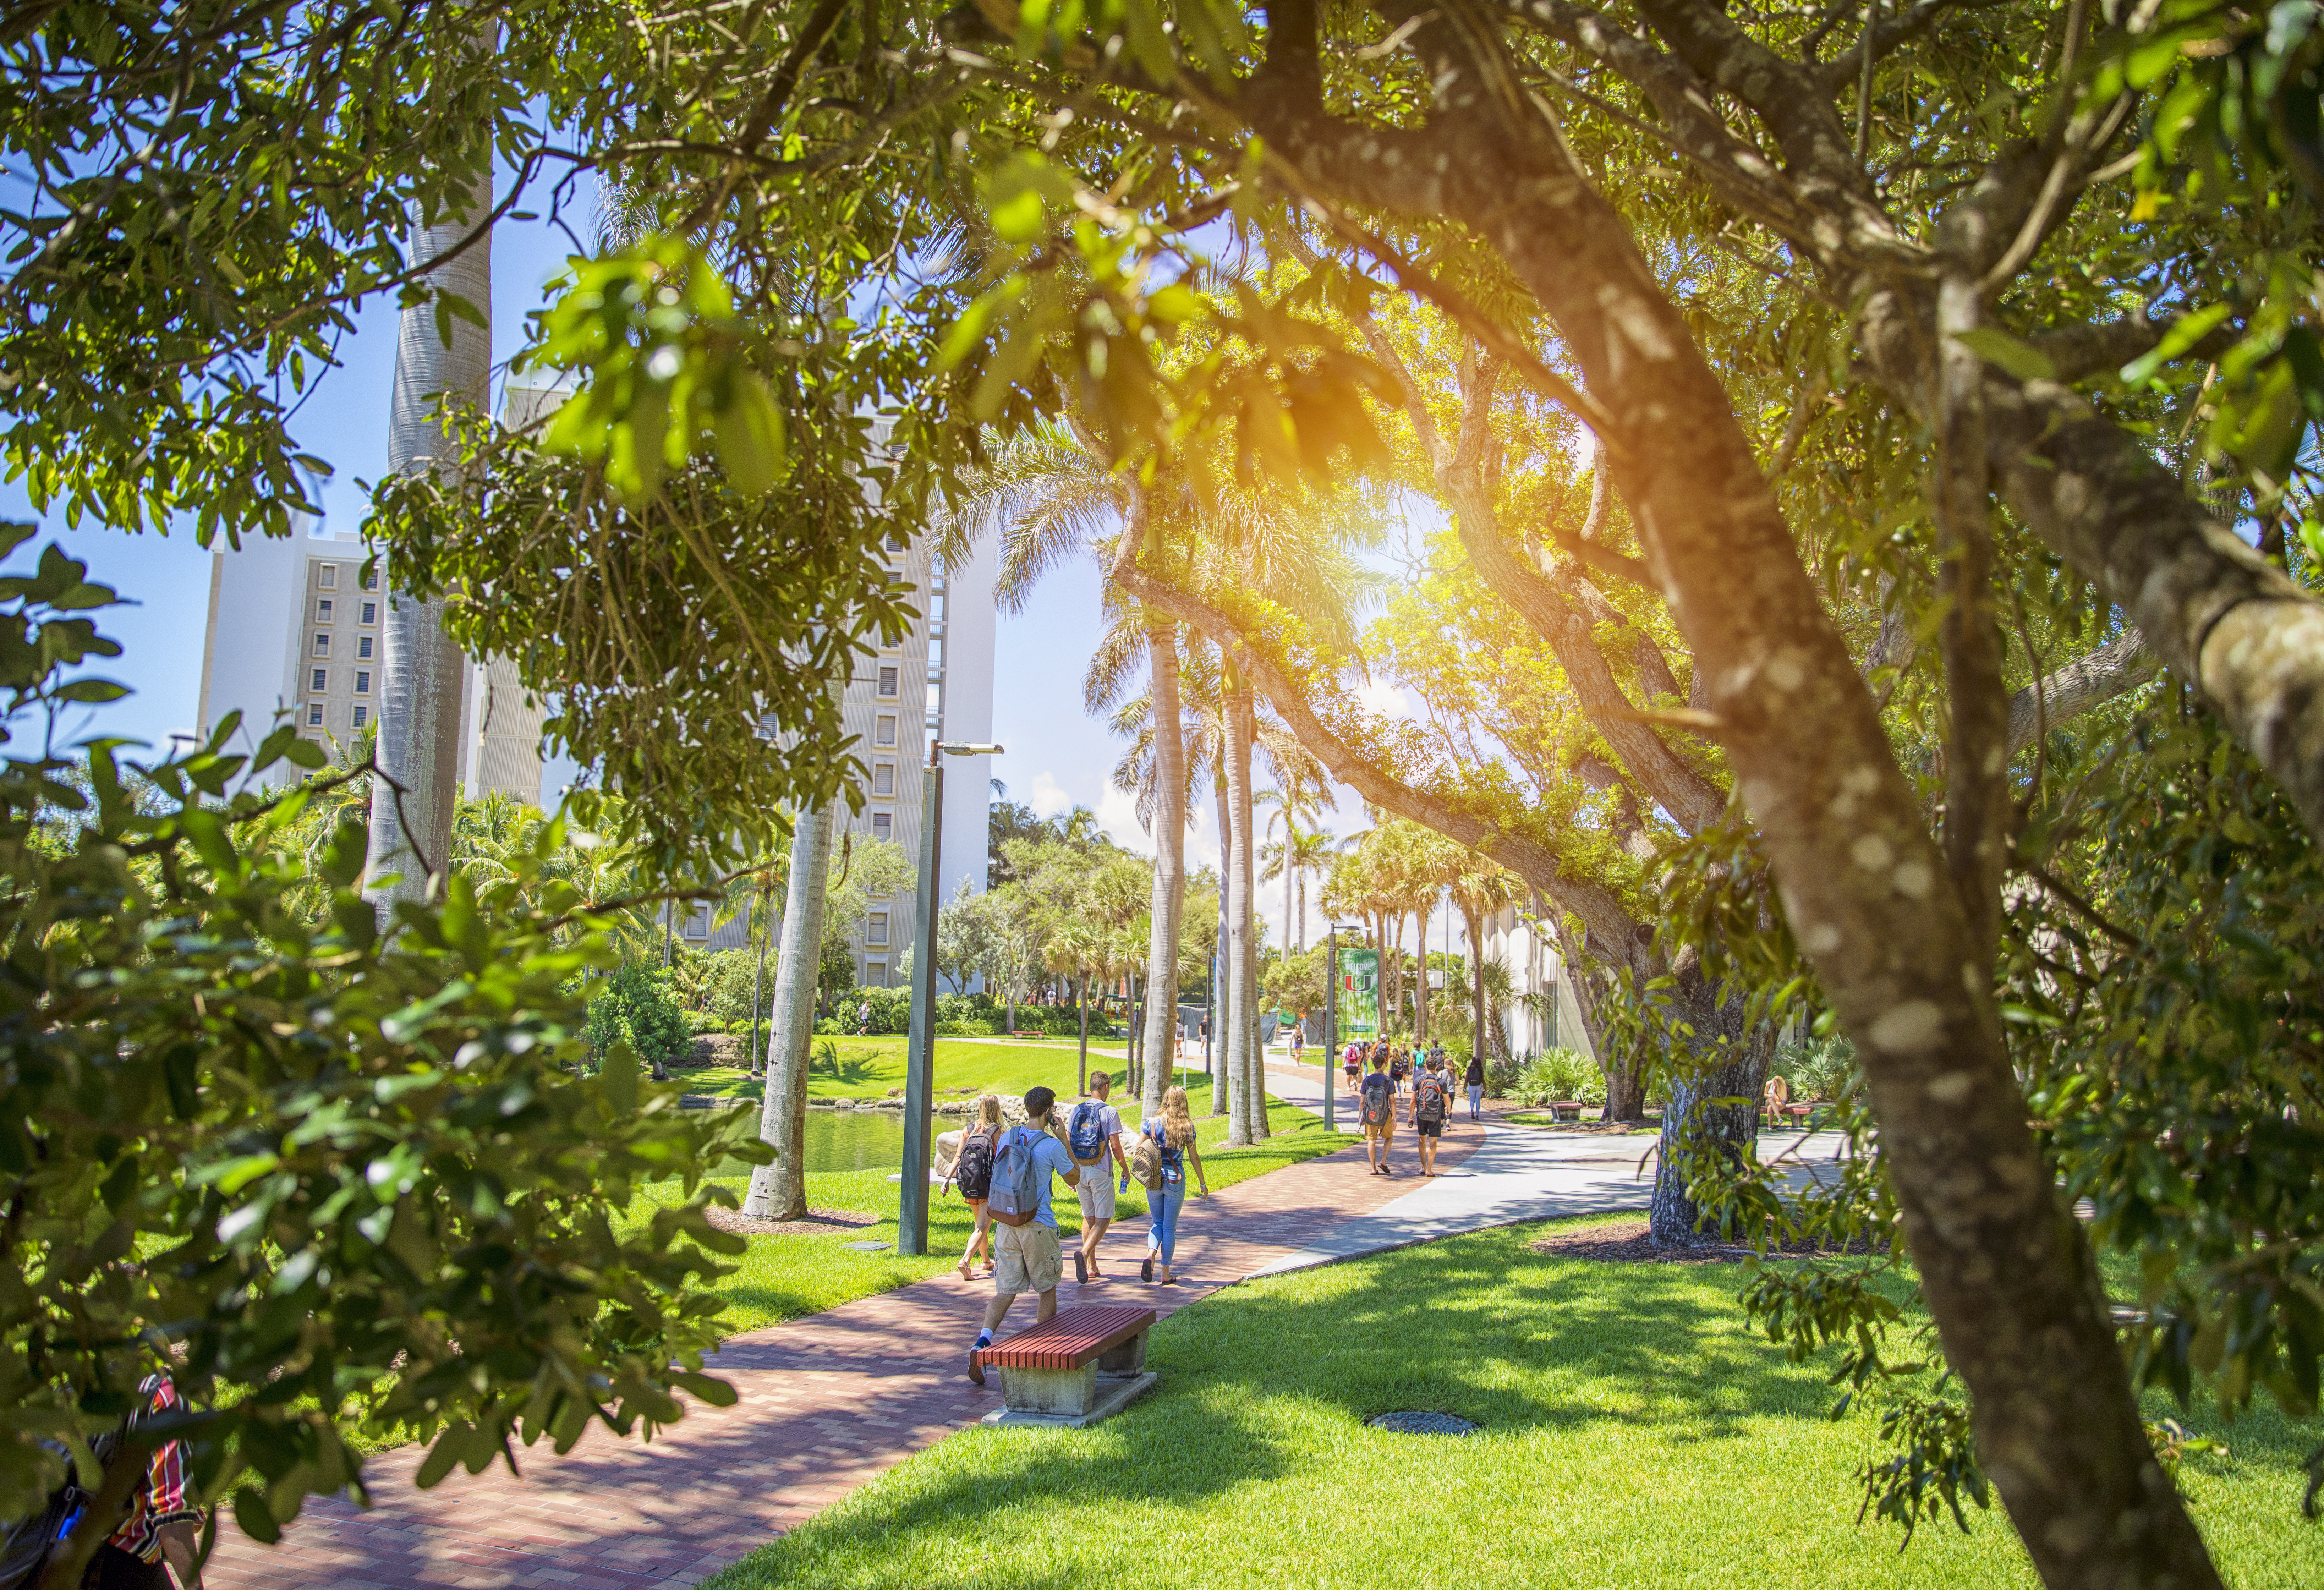 Students walking throughout the University of Miami Campus